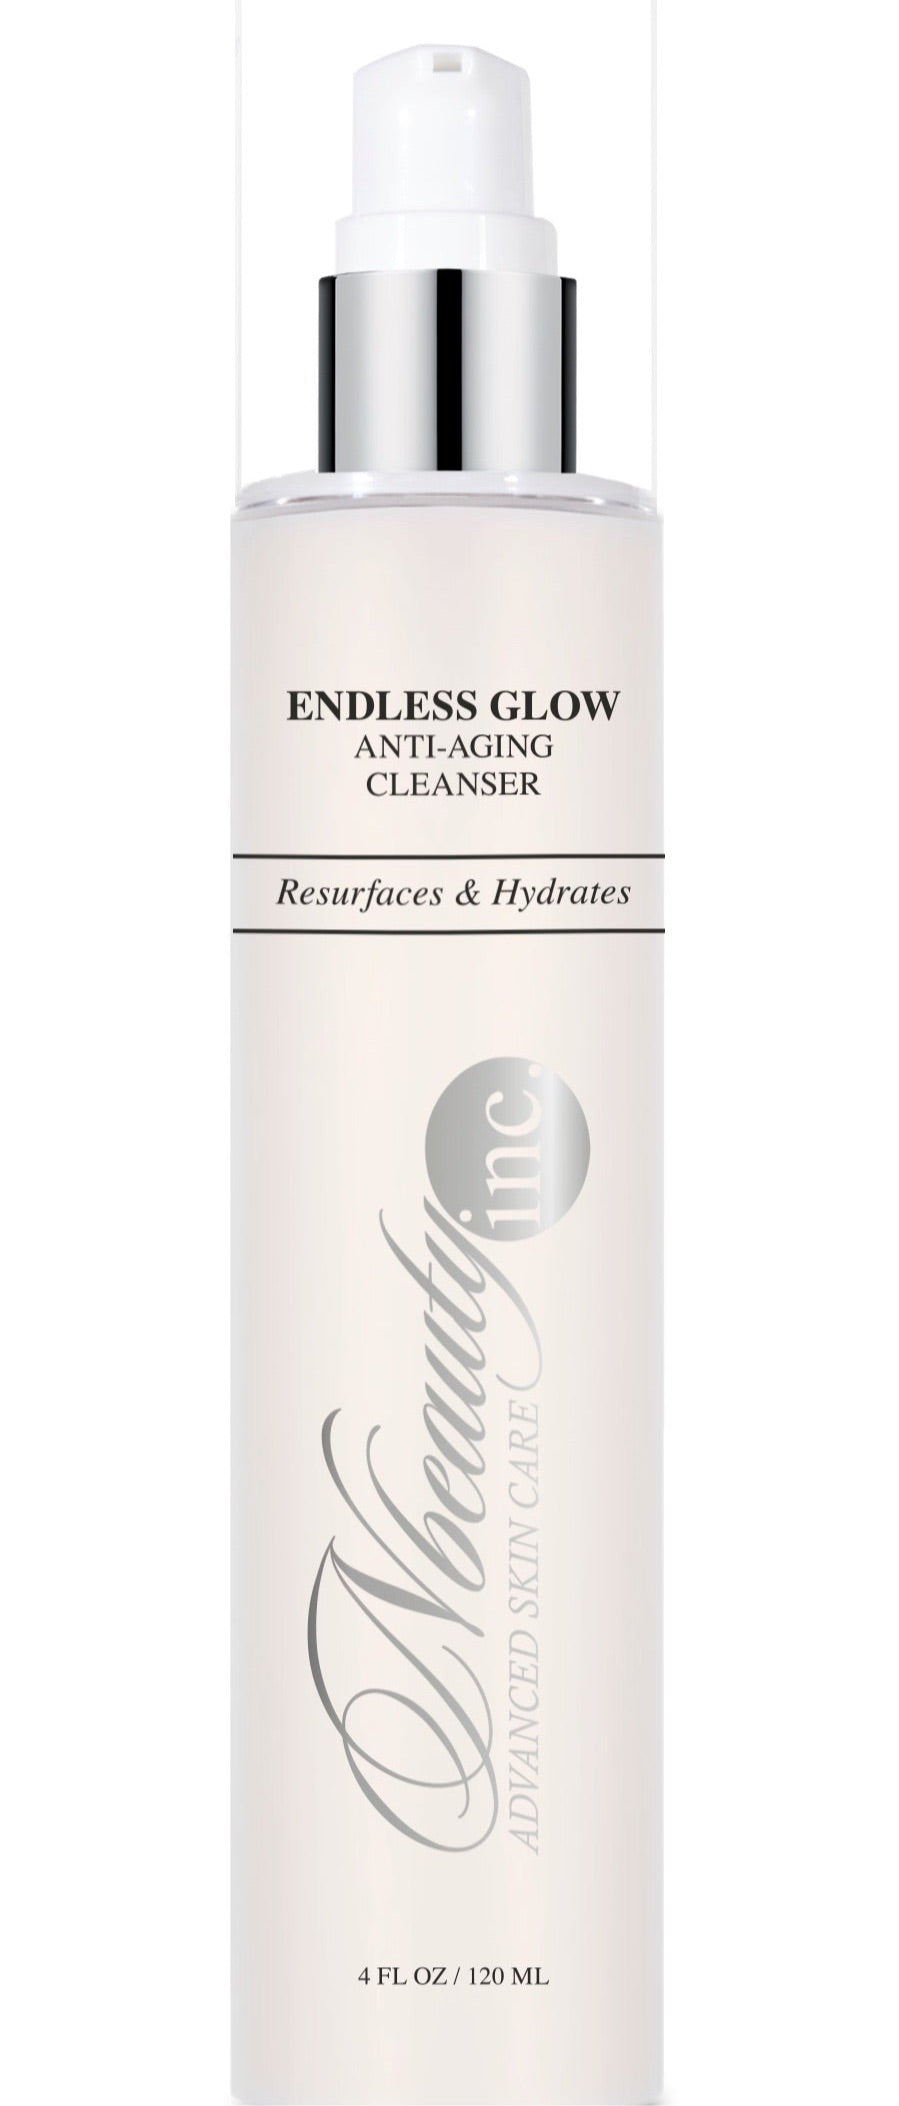 Endless Glow Anti-Aging Cleanser